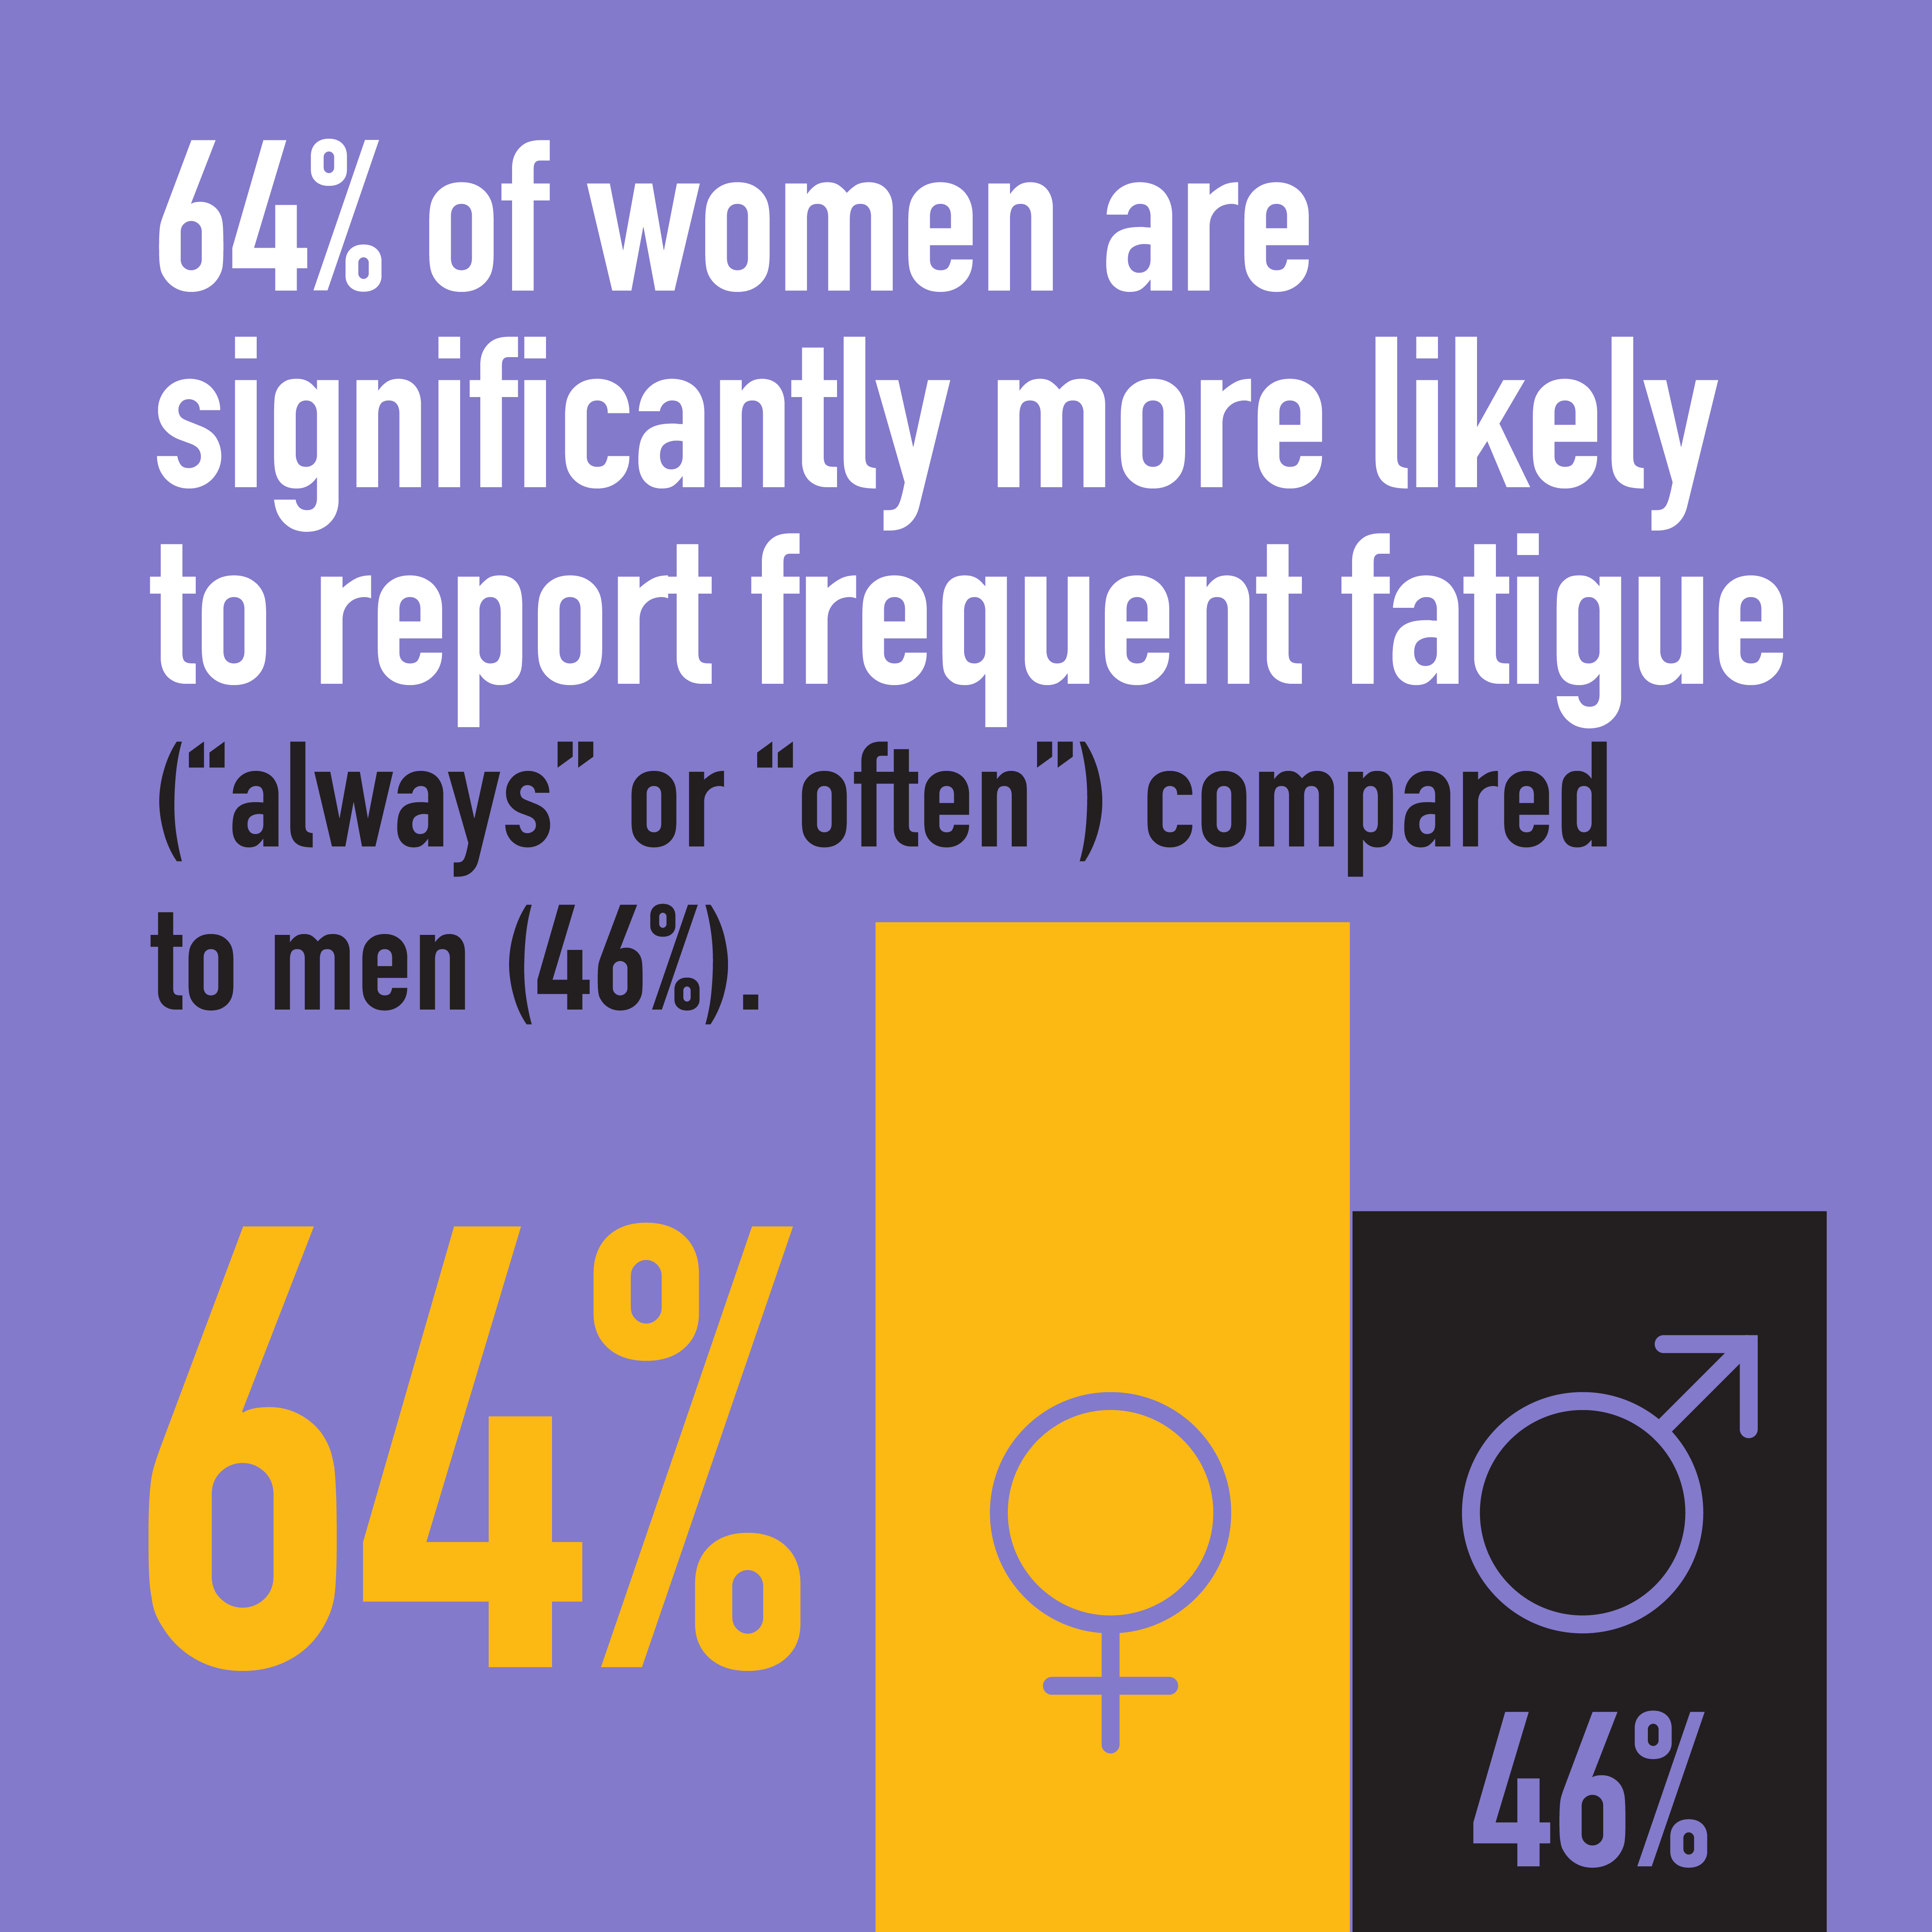 64% of women are significantly more likely to report frequent fatique (always or often) compared to men (46%)